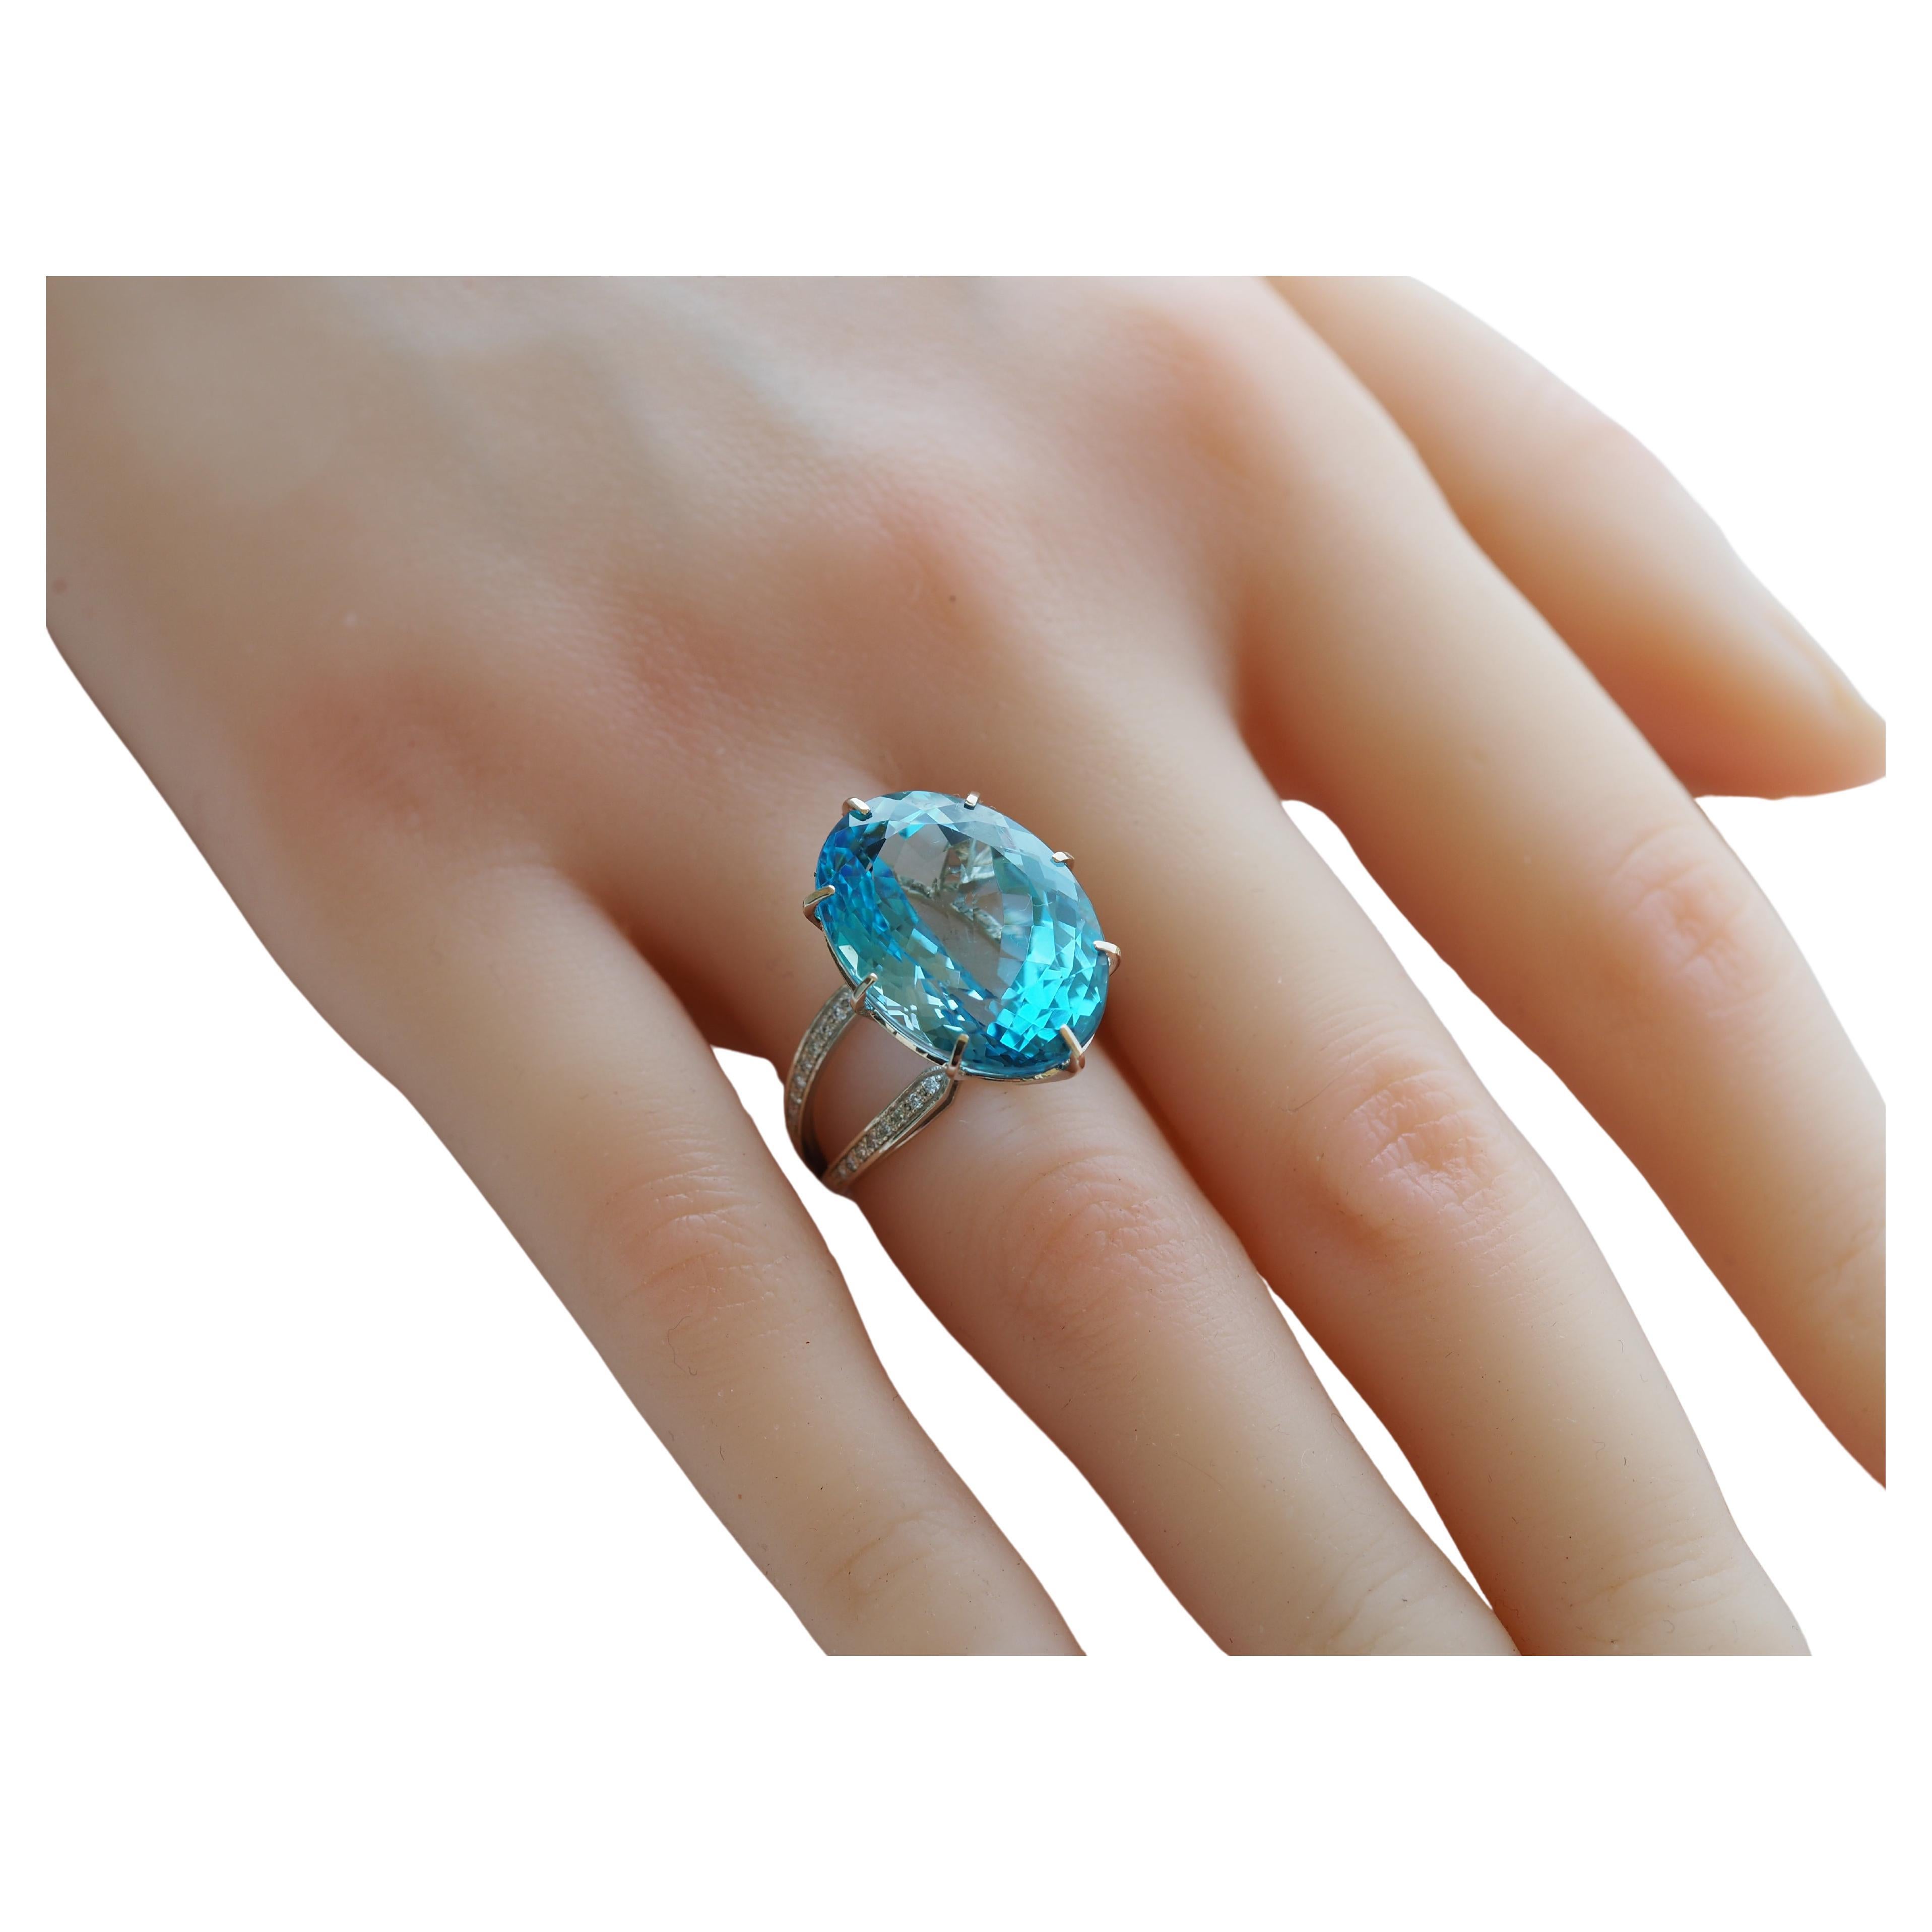 14 Karat Gold Ring with Oval Topaz and Diamonds, Gold Ring with Sky Blue Topaz